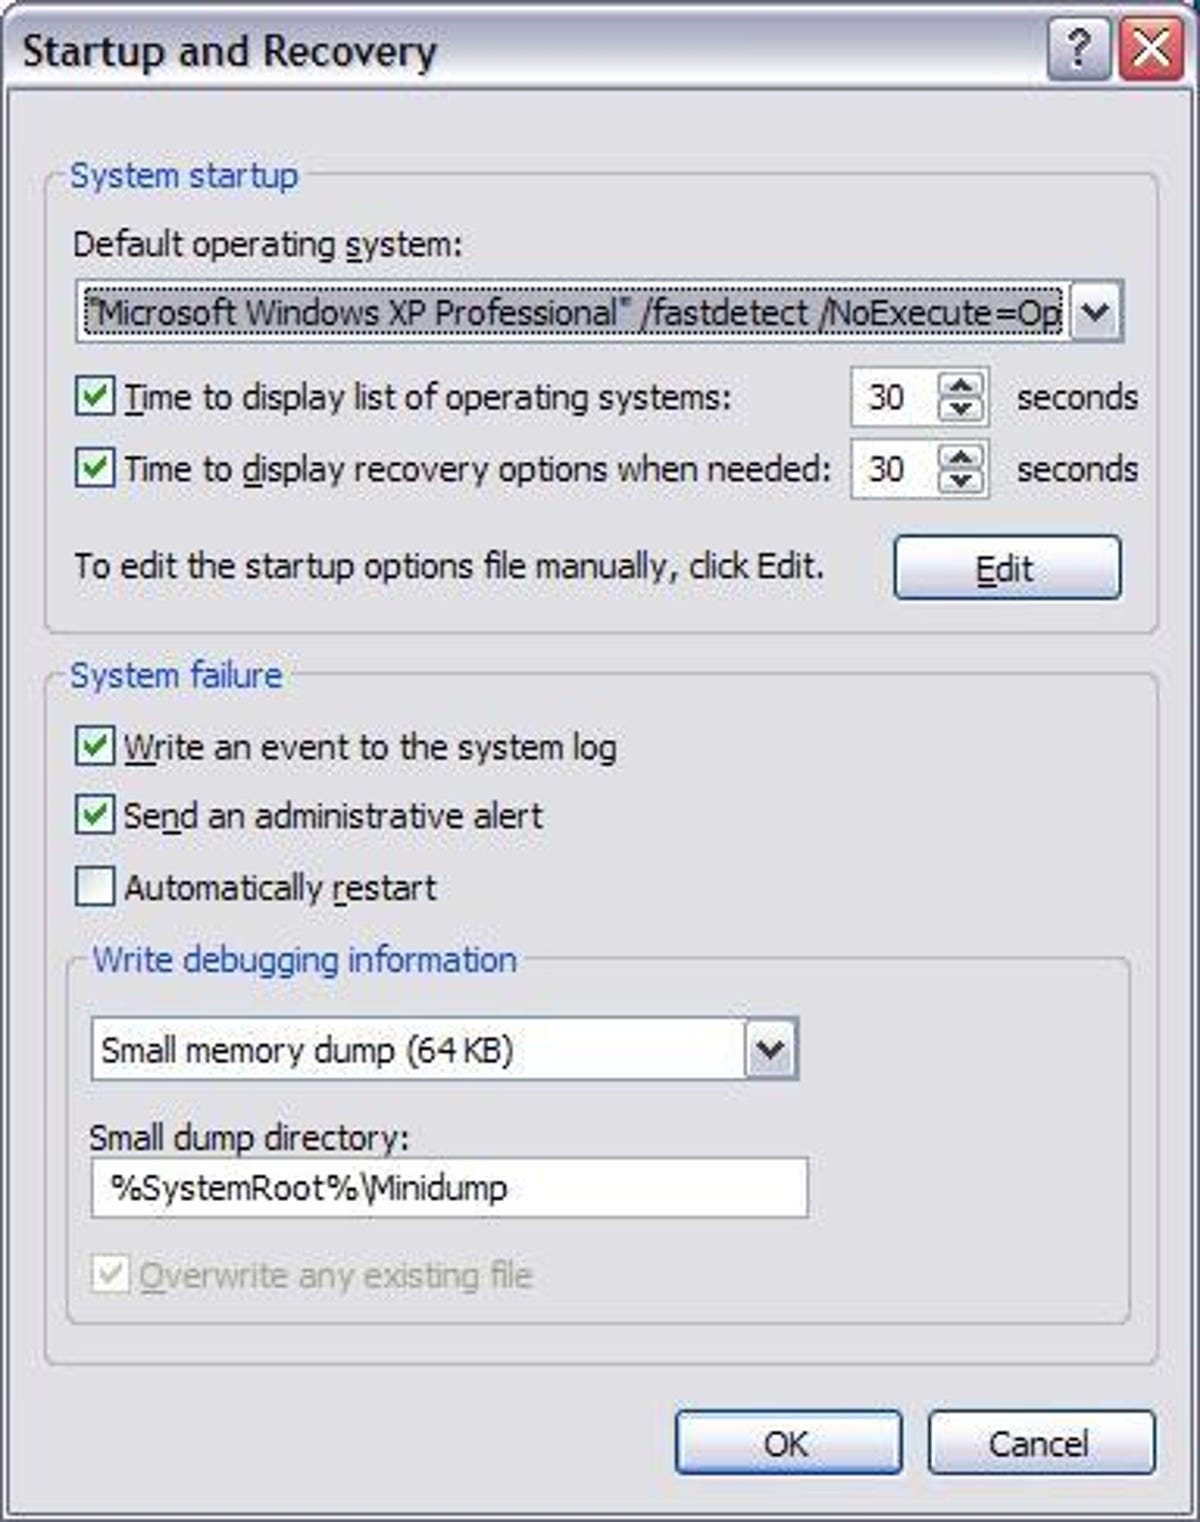 Windows XP's Startup and Recovery Options dialog box